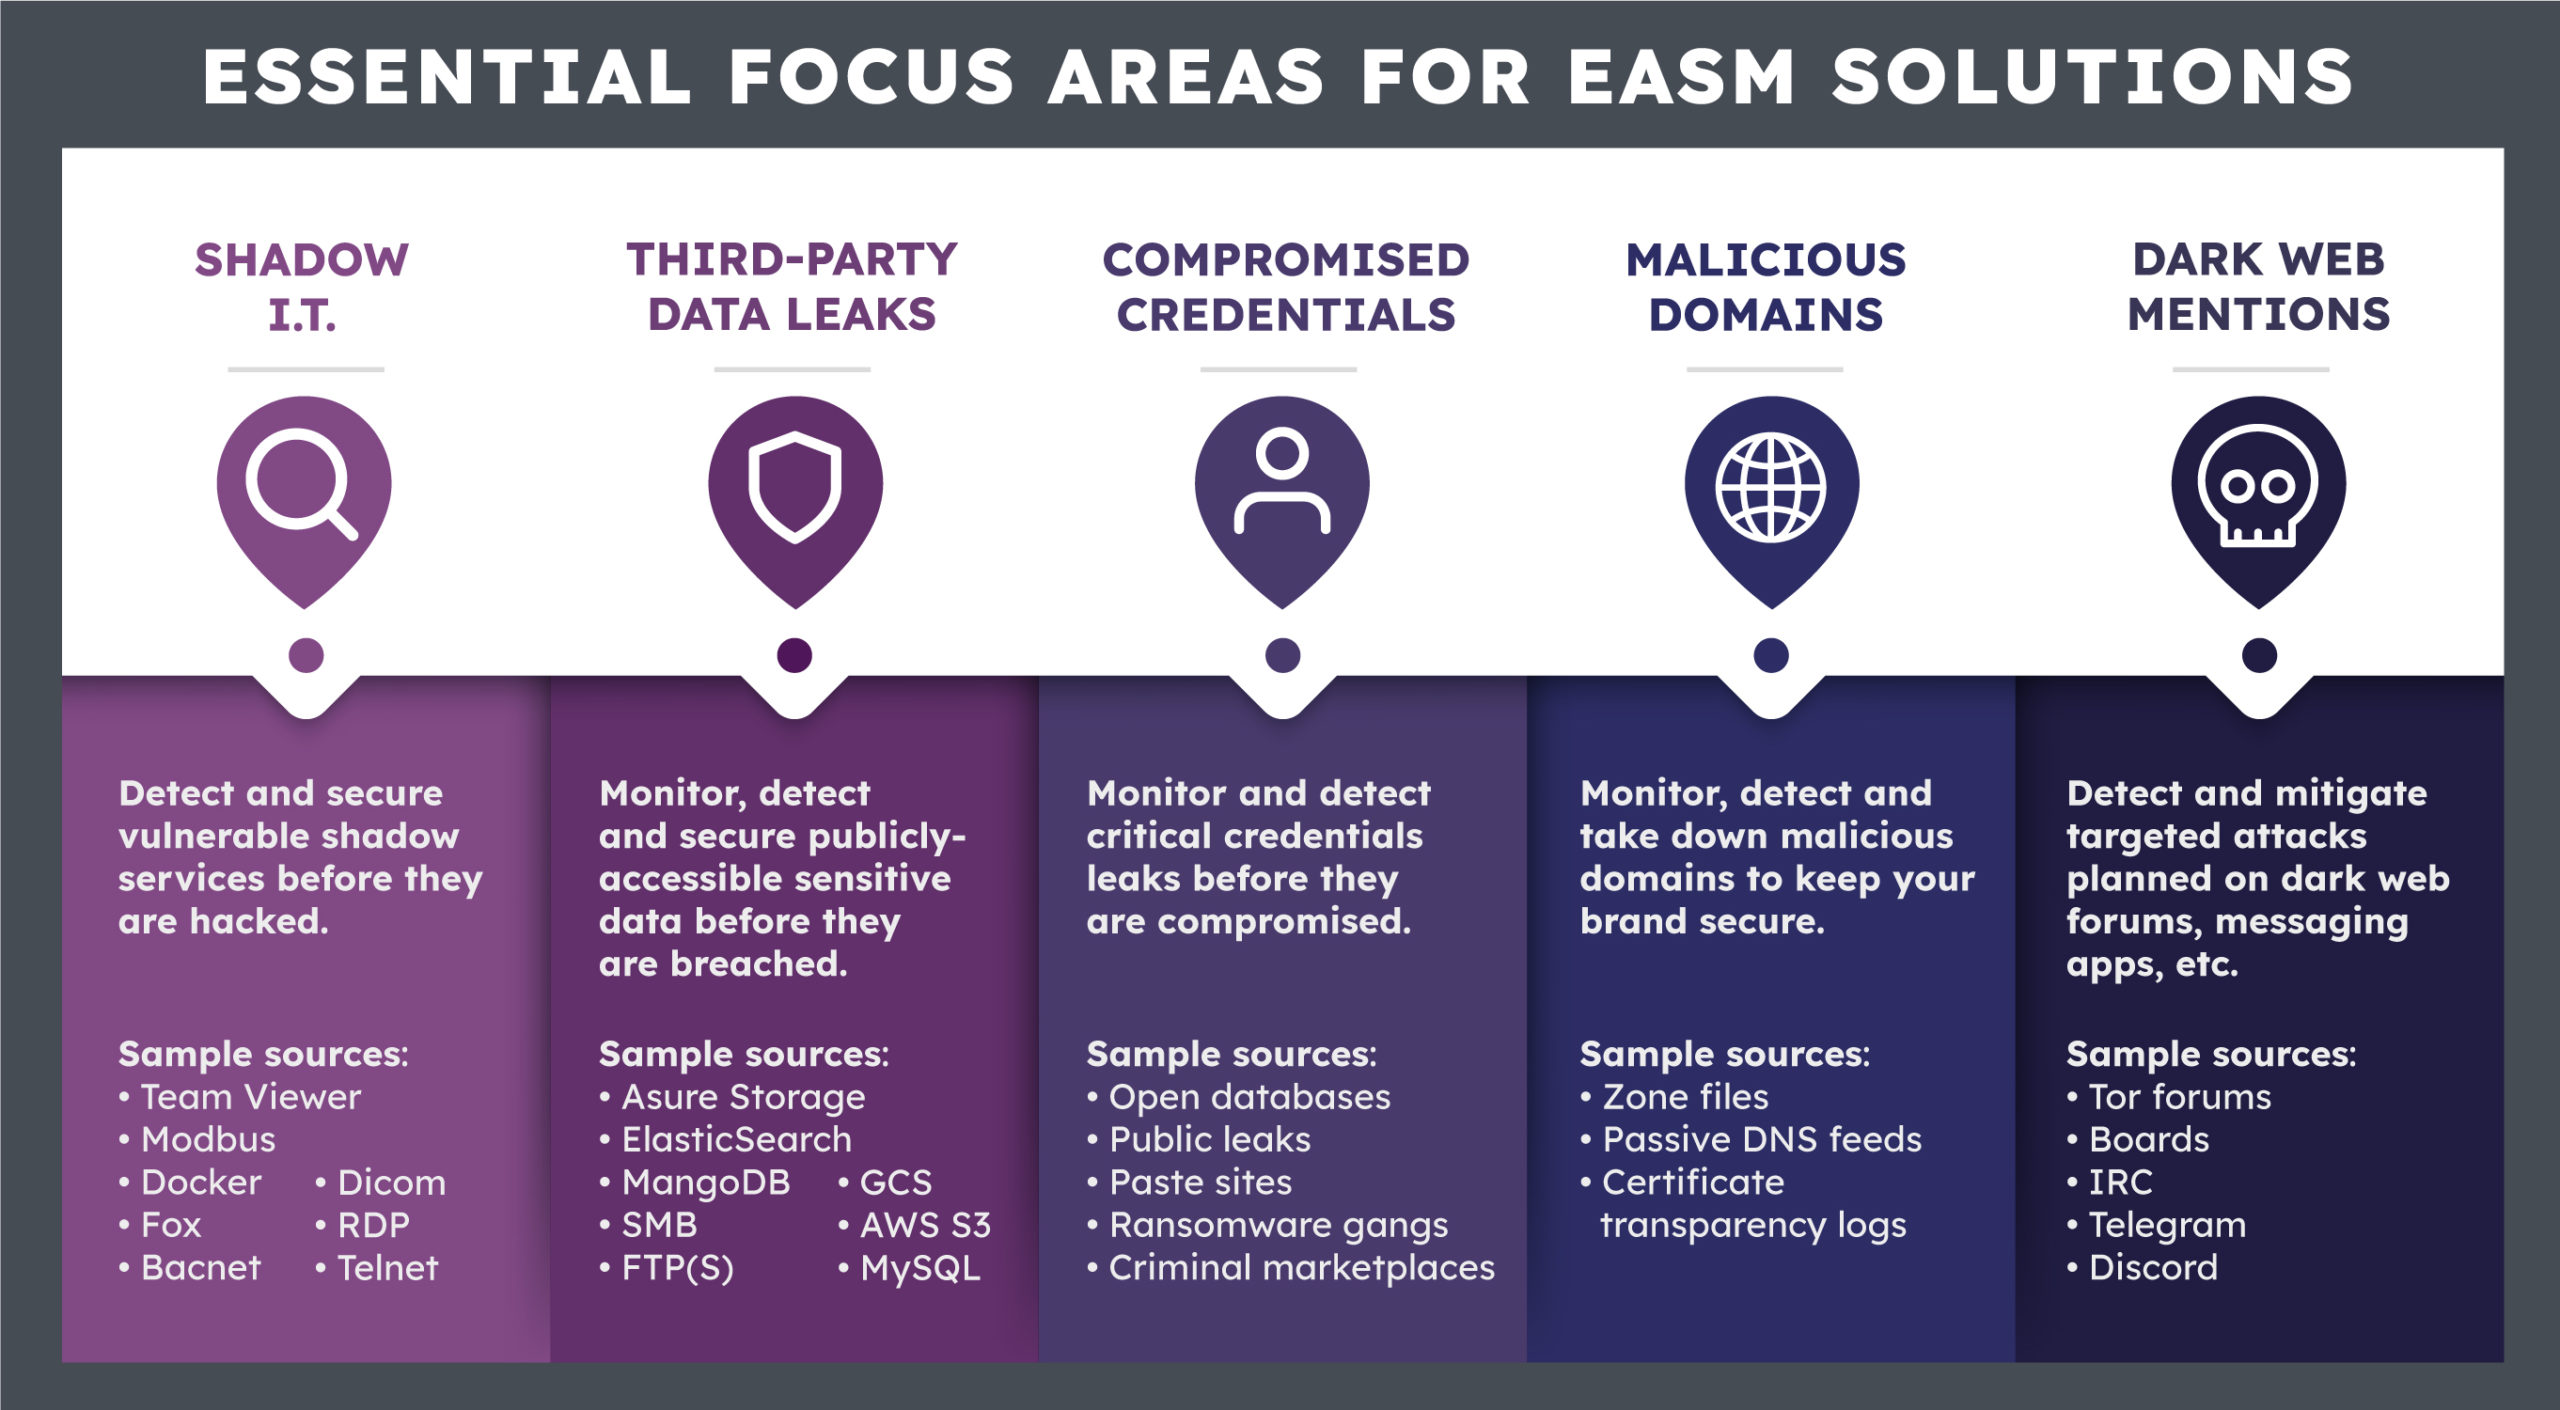 Essential focus areas for EASM solutions